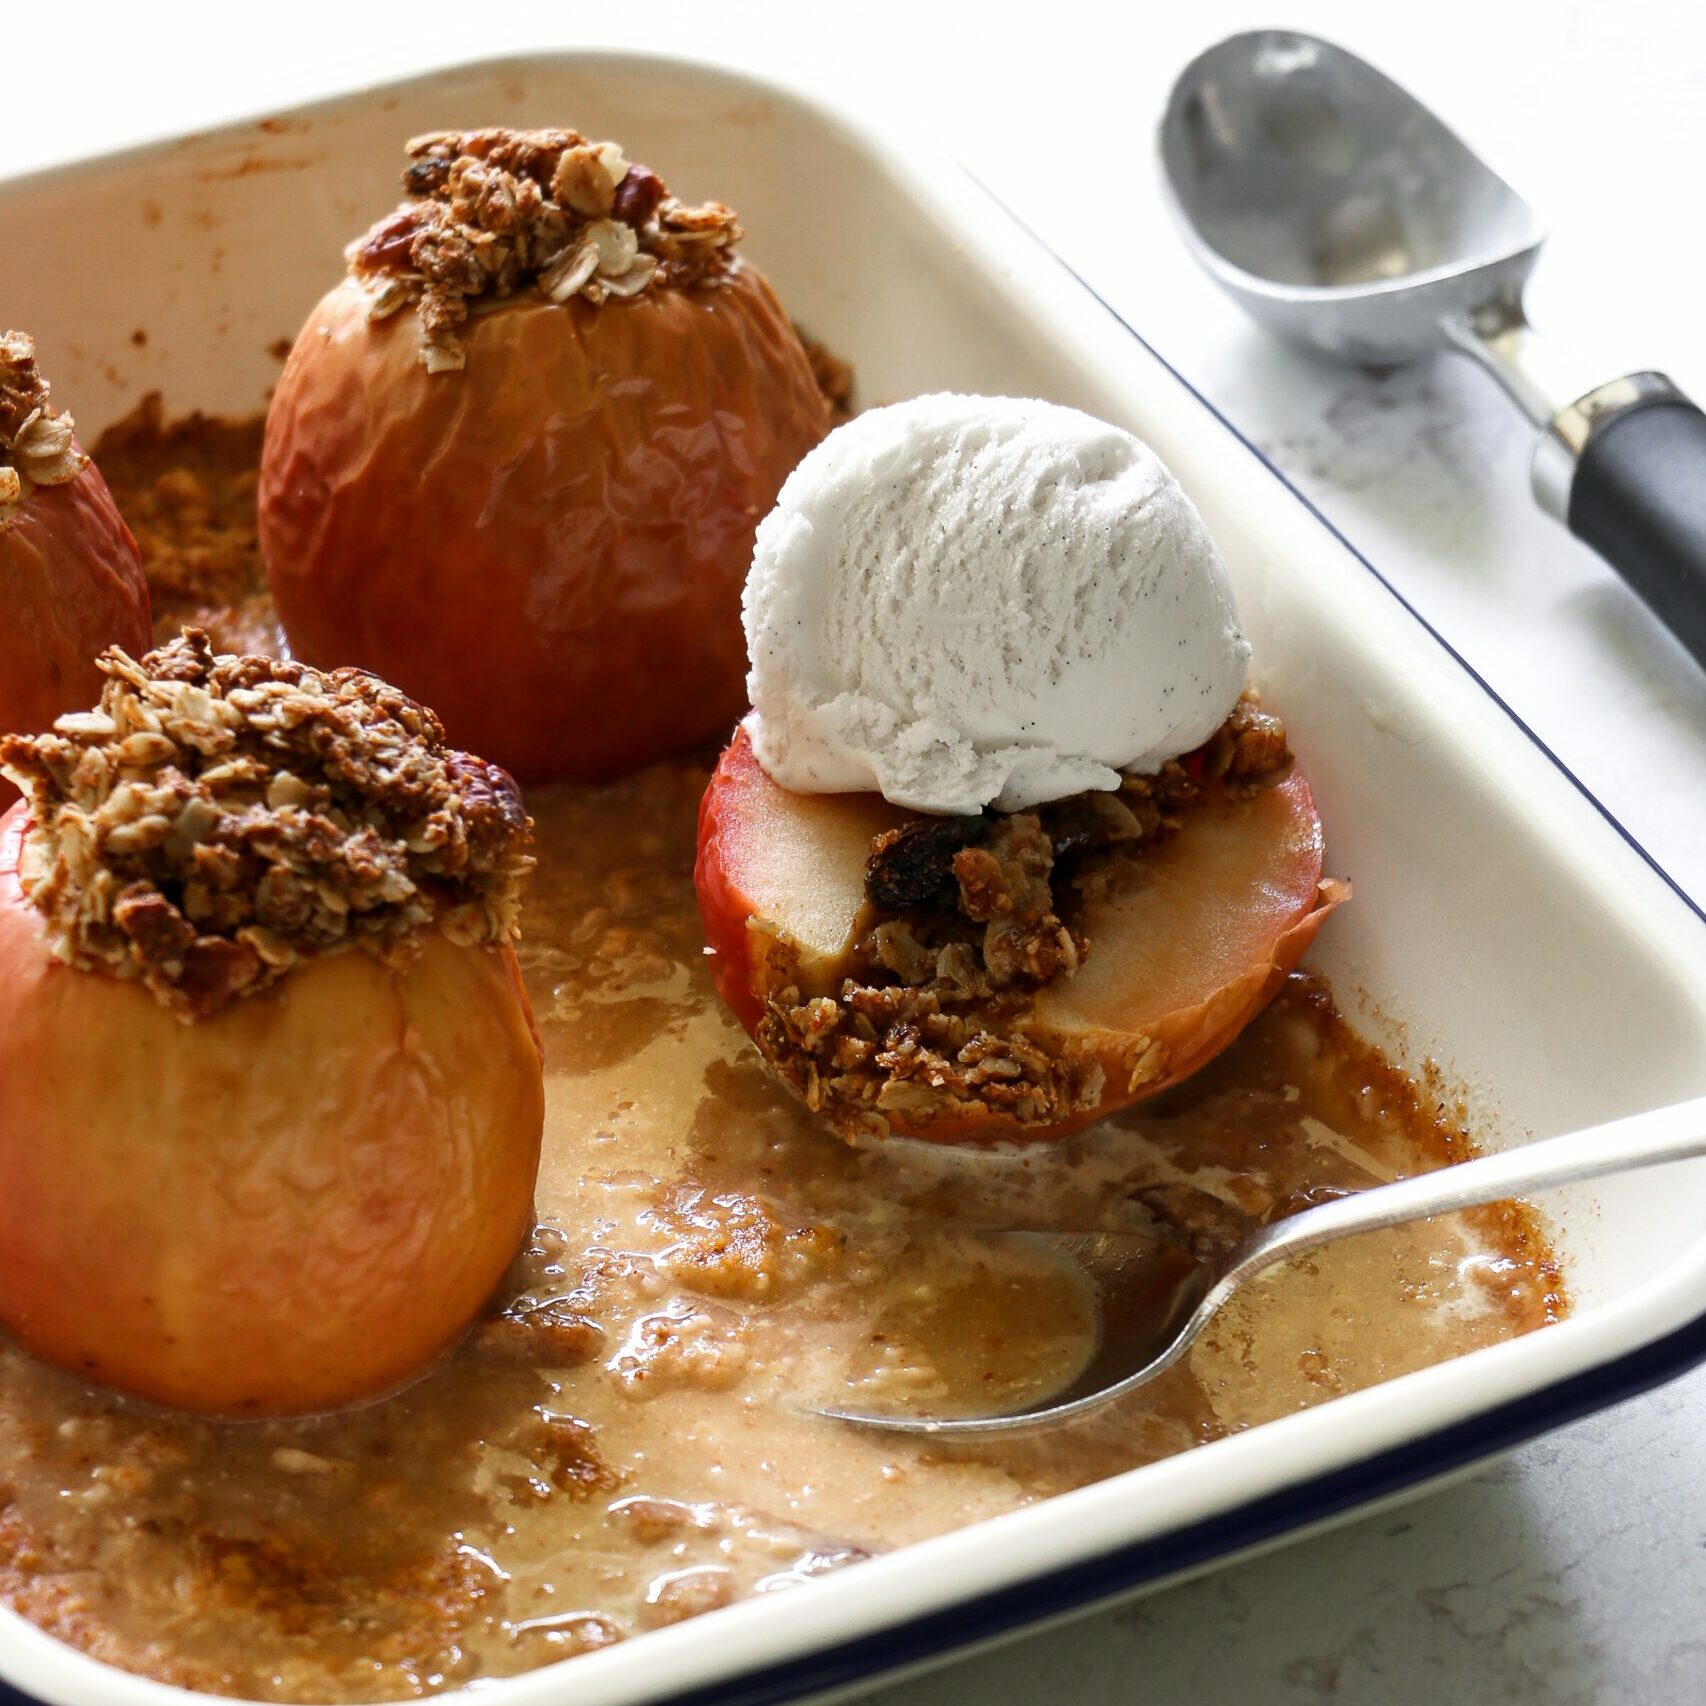 Baked Whole Apples with Vanilla & Cinnamon Crumble